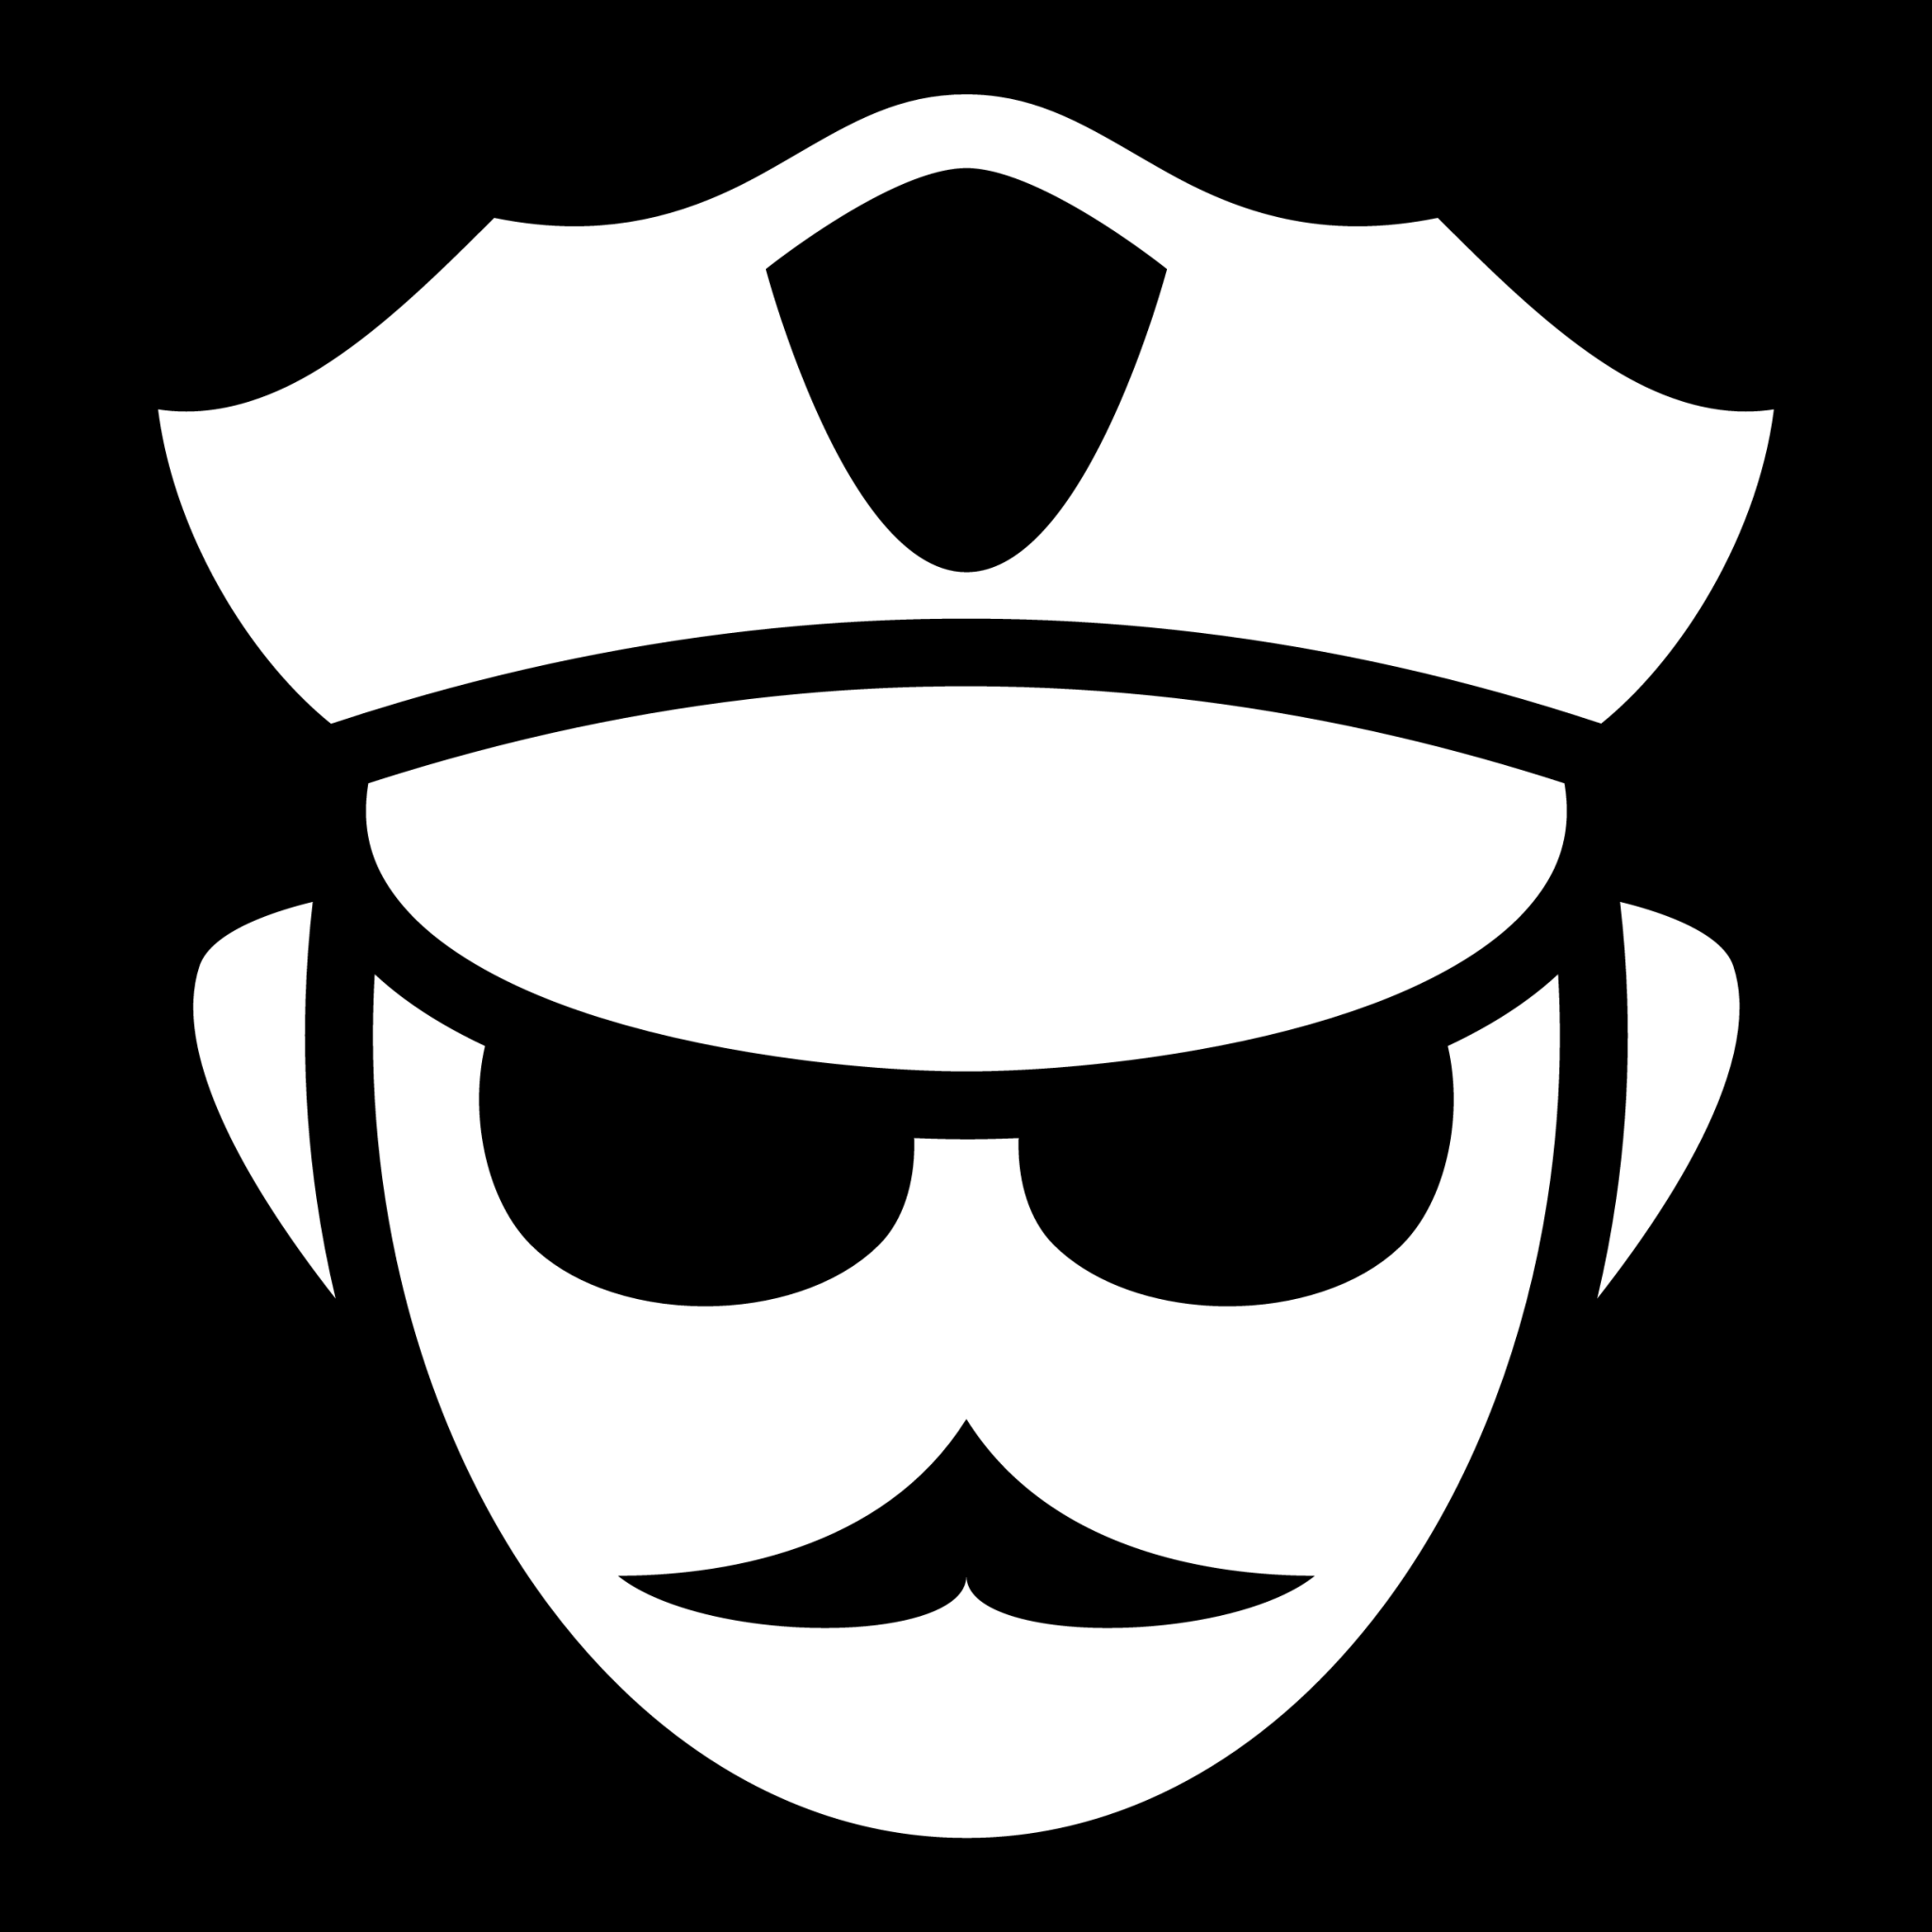 police officer head icon